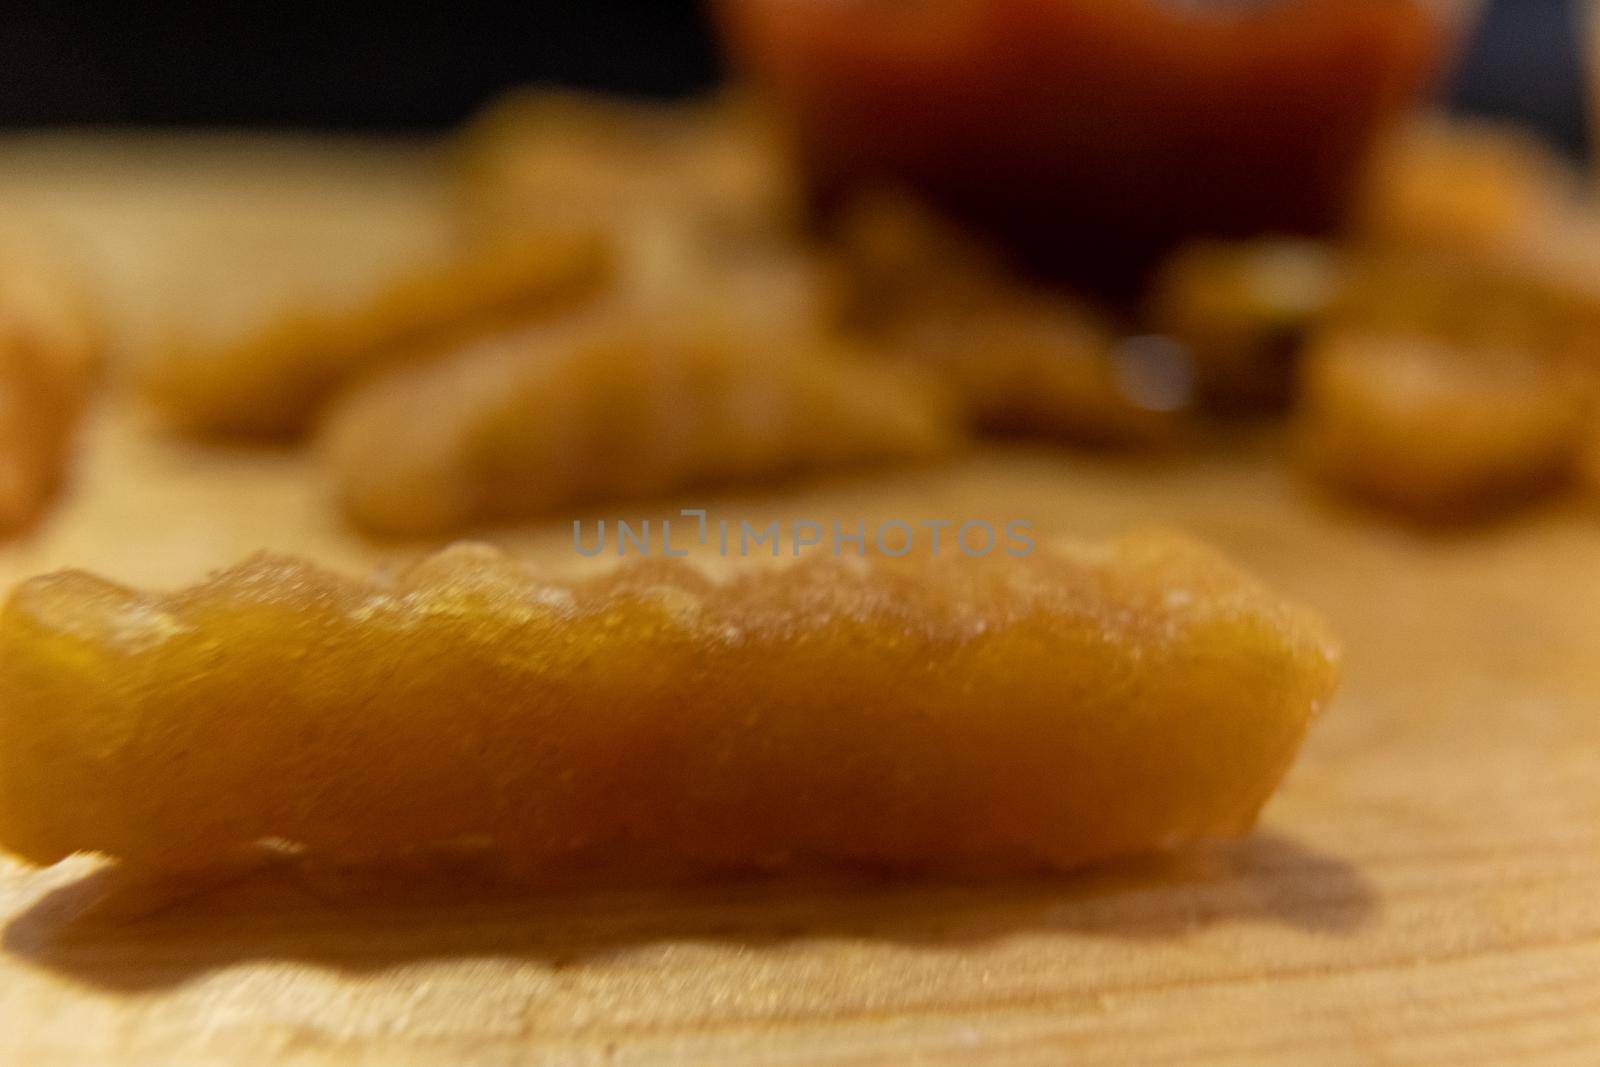 Wavy fry on wooden surface with blurry glass of ketchup as background by Kanelbulle